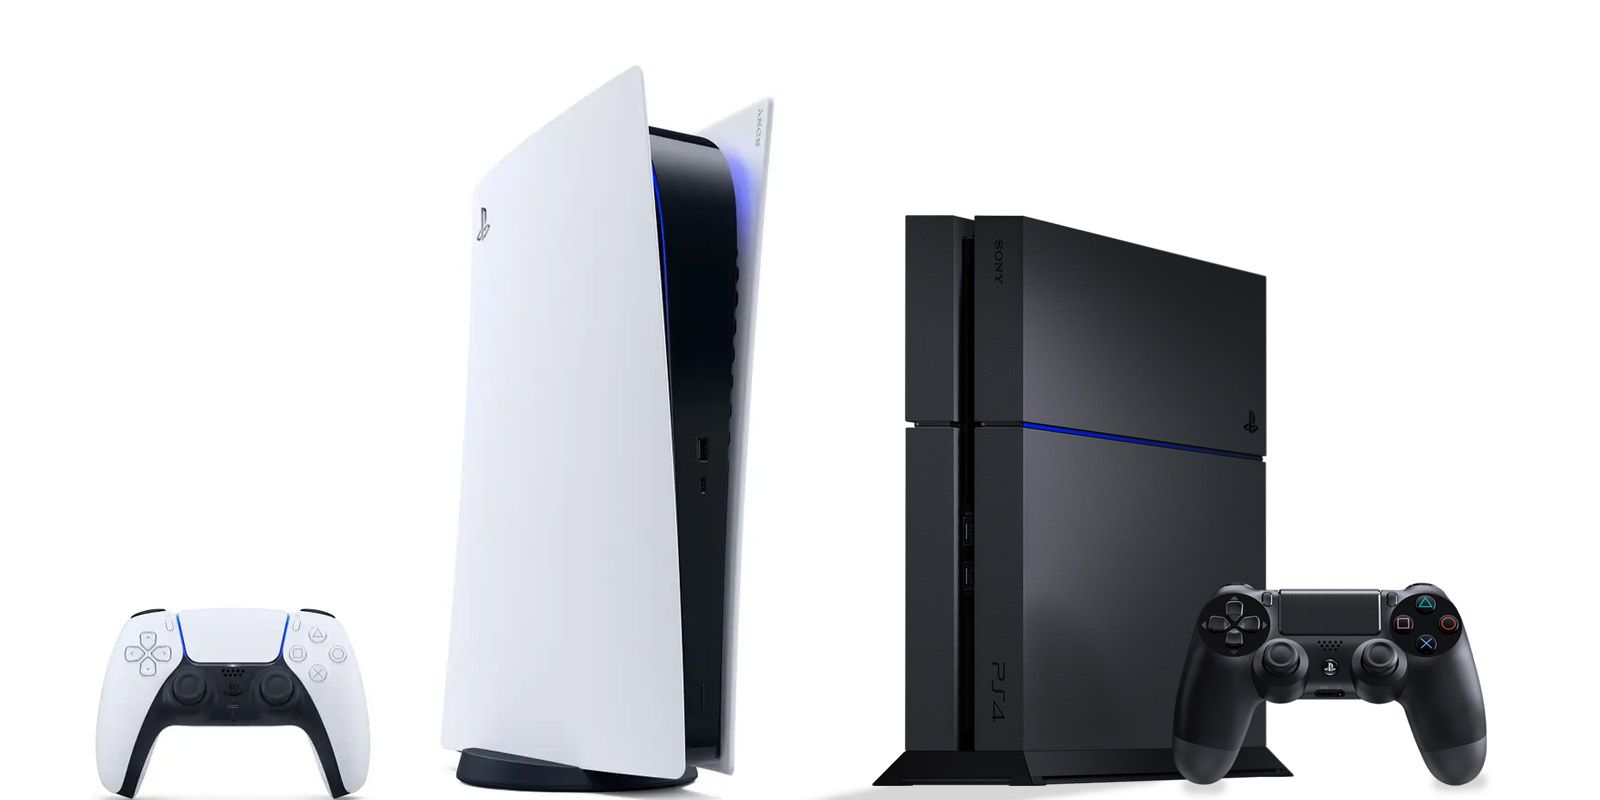 playstation 4 price after ps5